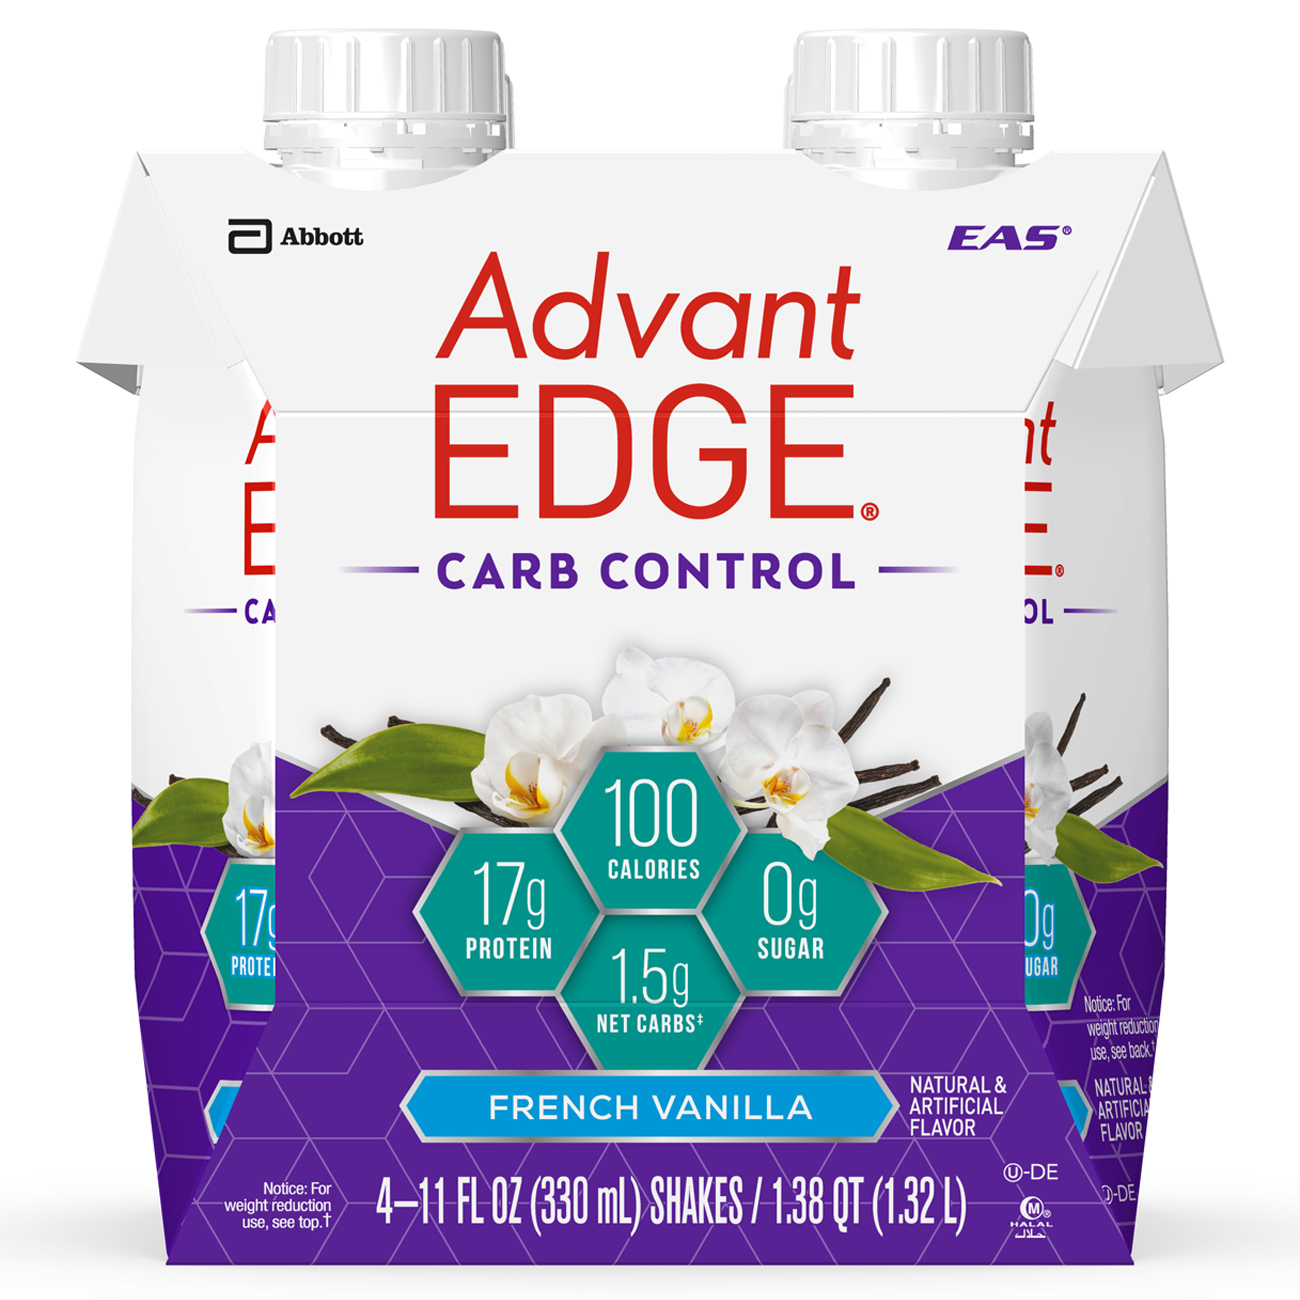 EAS AdvantEDGE Carb Control Protein Shake, French Vanilla, 17g Protein, 4 Ct - image 1 of 13